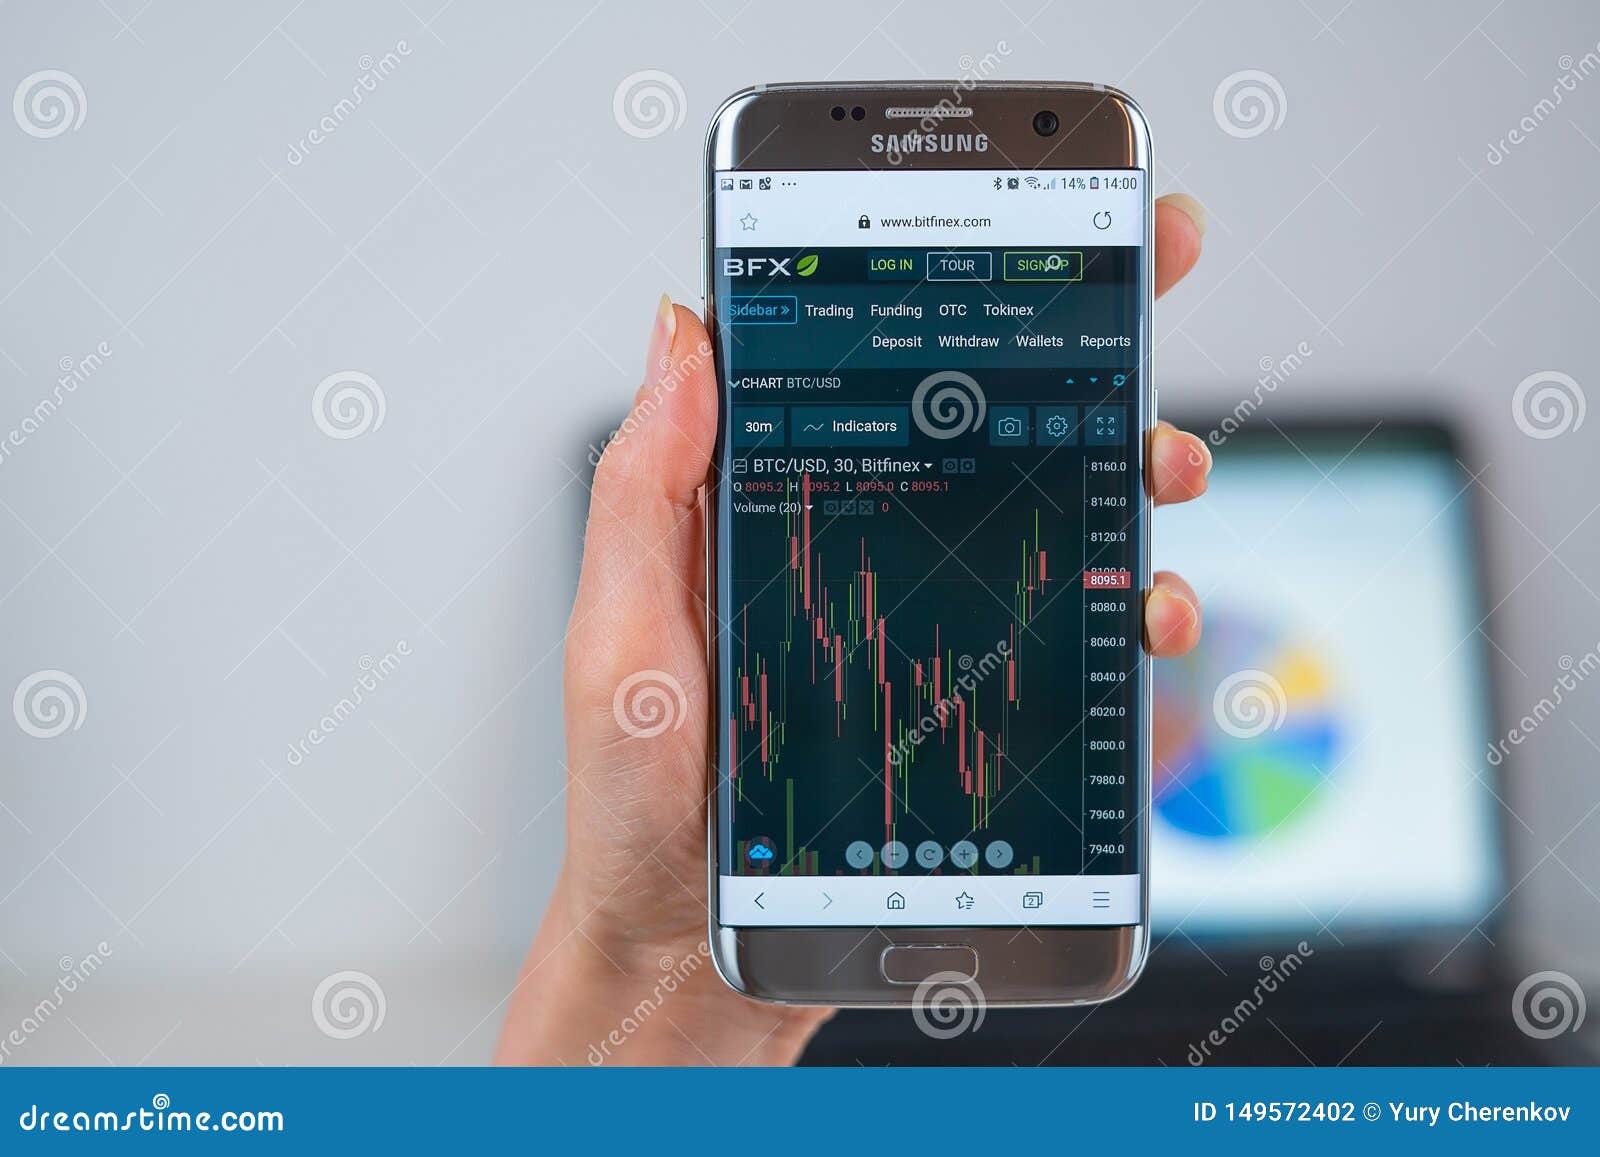 Bitfinex Web Site Opened On The Mobile Editorial ...